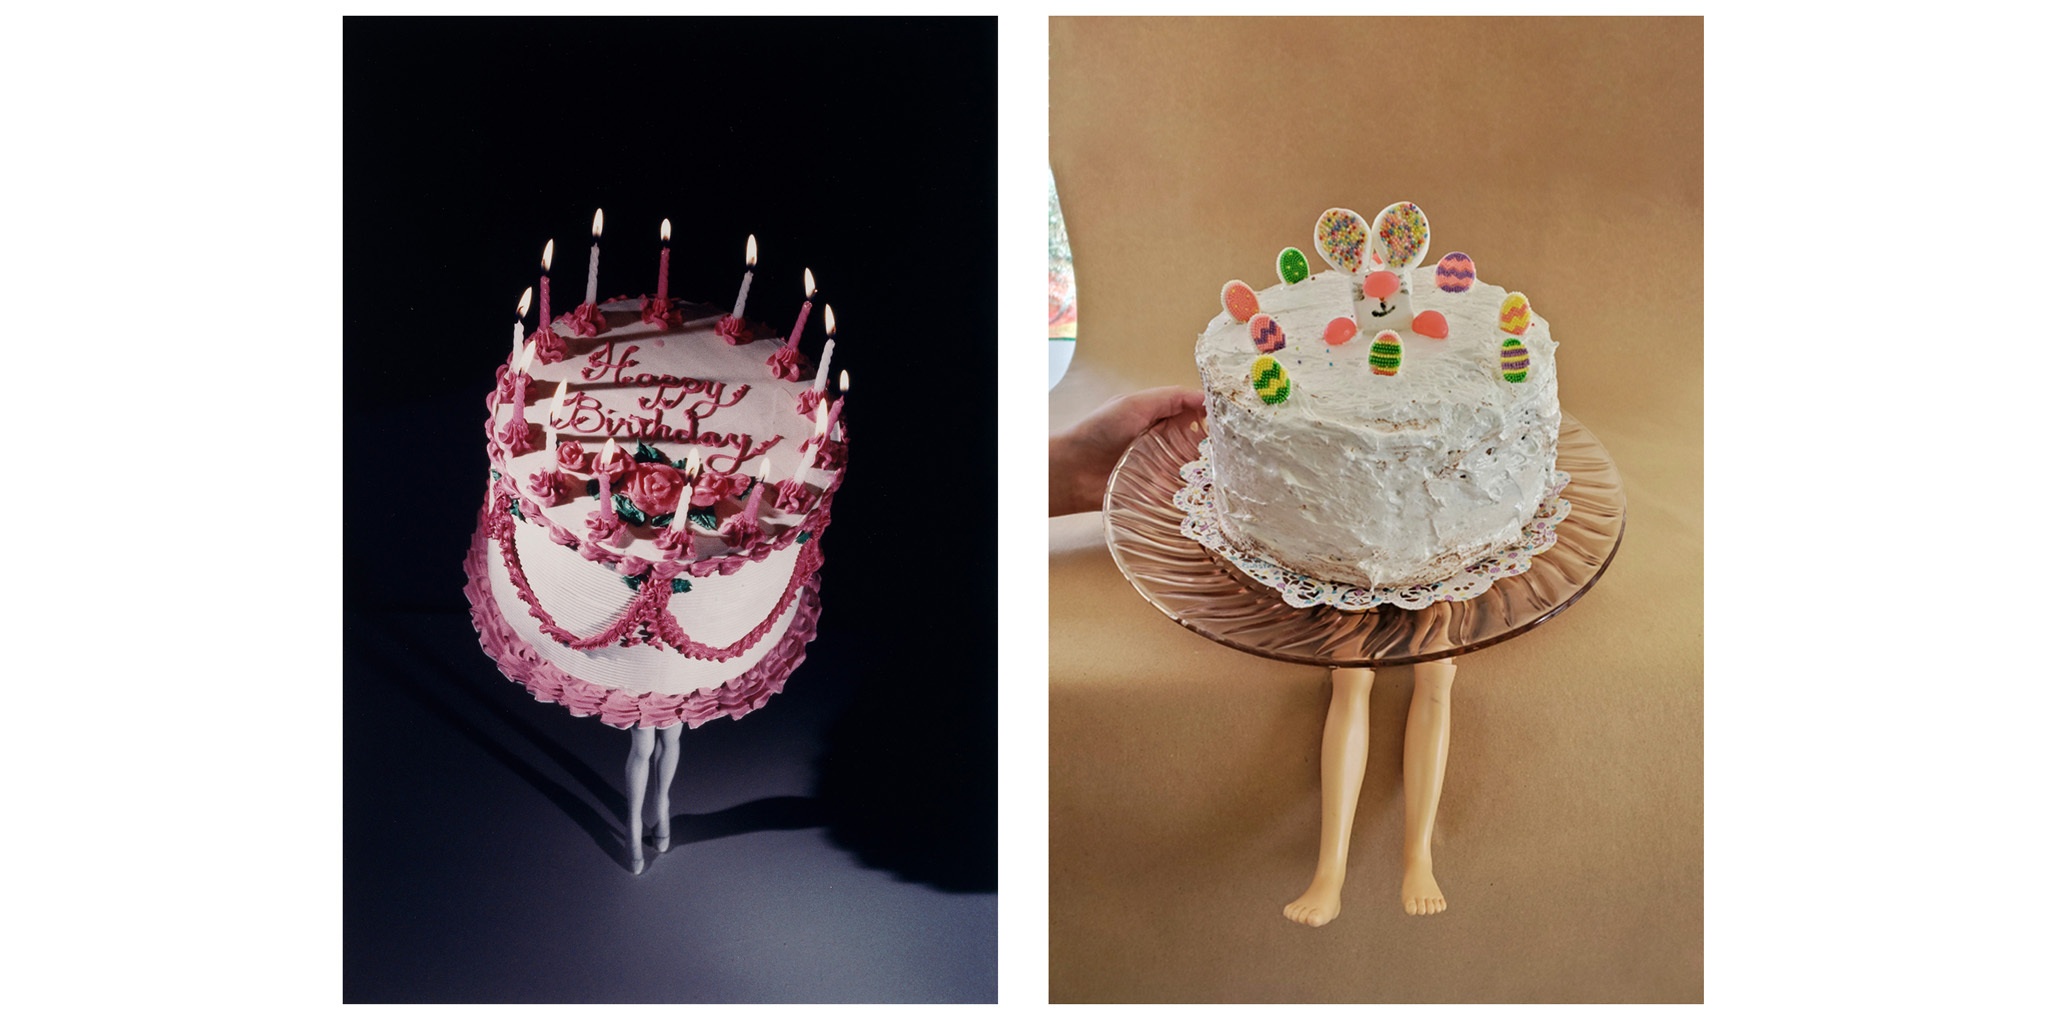 Shannon Ambrose '20 [on Laurie Simmons' _Walking Cake II_, 1989, cibachrome print on Kodak paper, 11 3/4 x 7 7/8 inches (approx.), Gift of Eileen and Michael Cohen, 2018.1.17](https://tang.skidmore.edu/collection/artworks/872-walking-cake-ii)